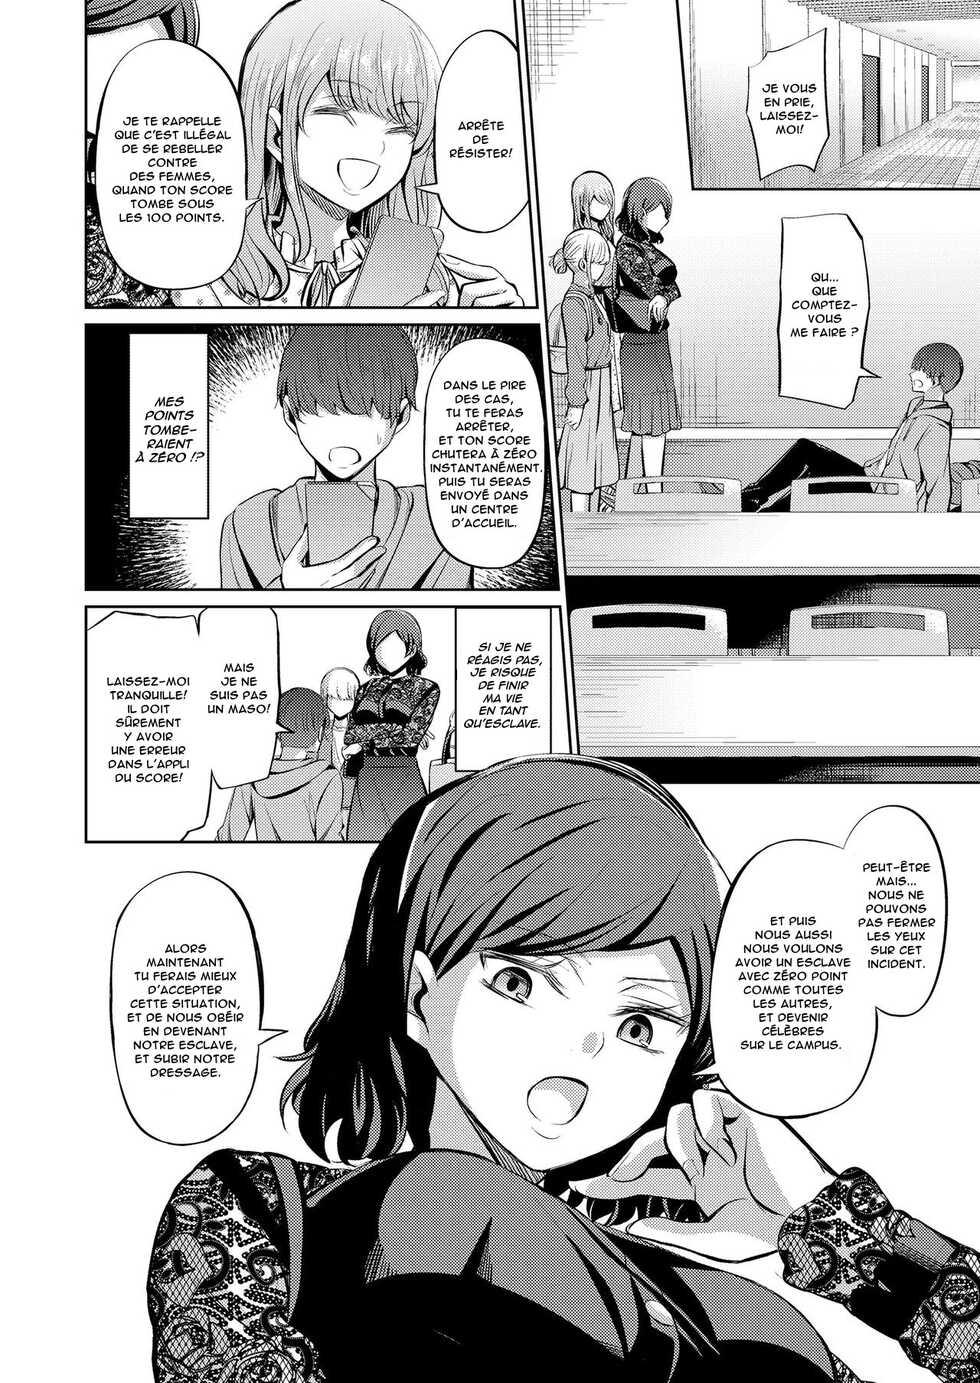 [Yamahata Rian] Tensuushugi no Kuni | A Country Based on Point System (Girls forM Vol. 20) [French] [Anatoh] [Digital] - Page 8